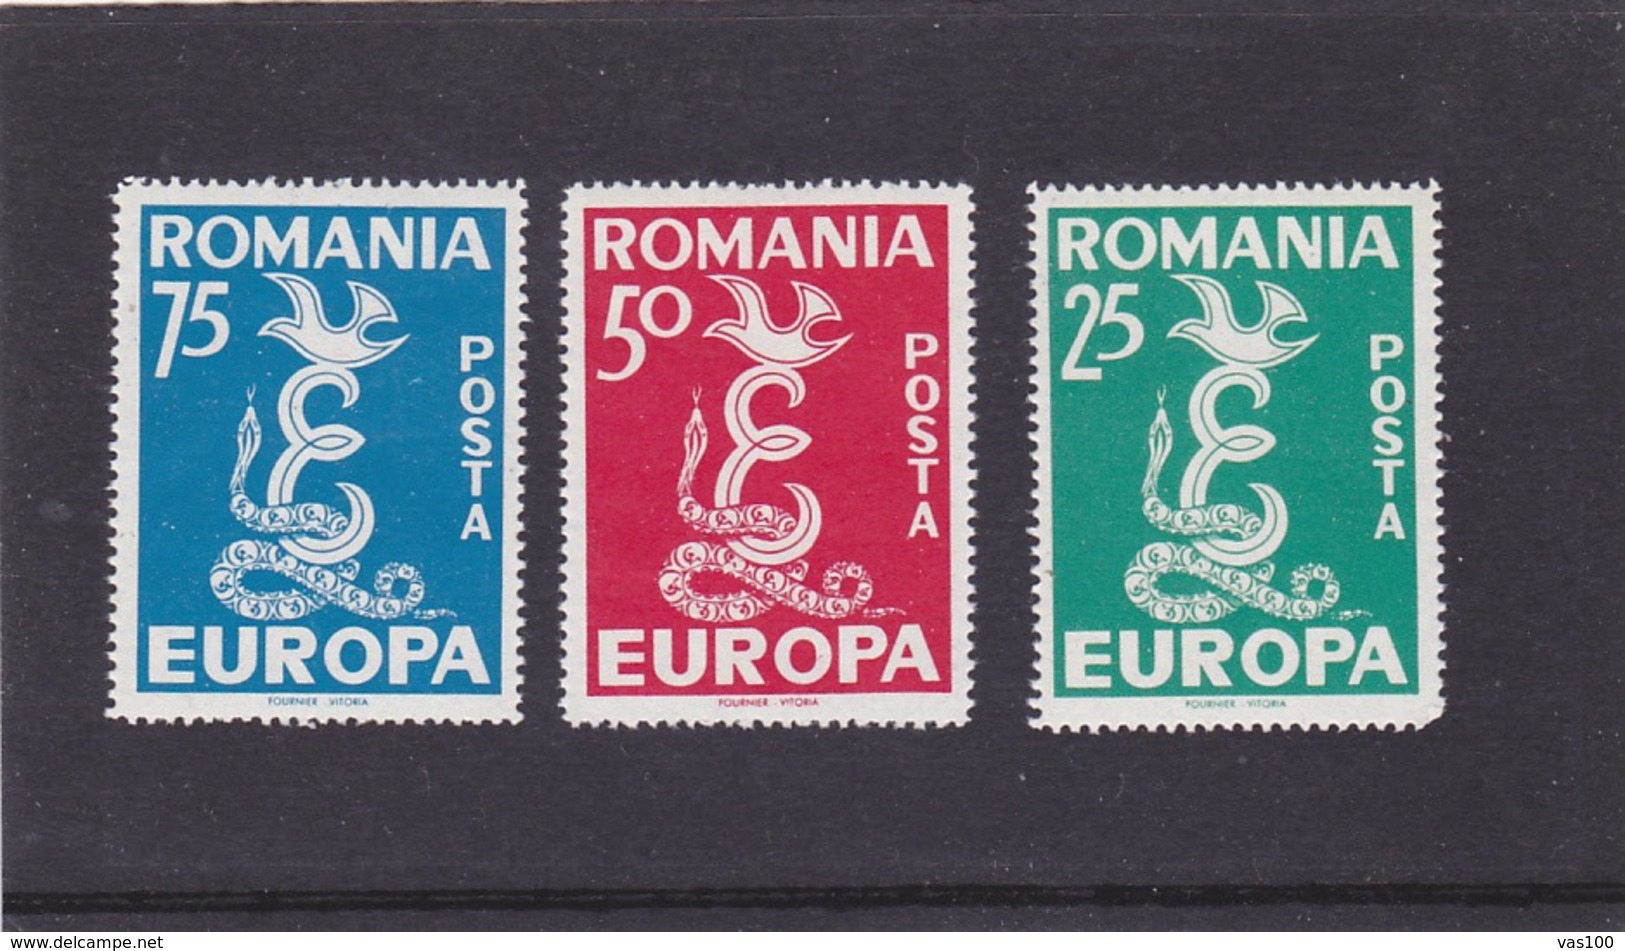 EUROPA CEPT, FREE ROMANIA, EXILE IN SPAIN, FULL SETS PERFORATED,MNH, 1958, ROMANIA - 1958